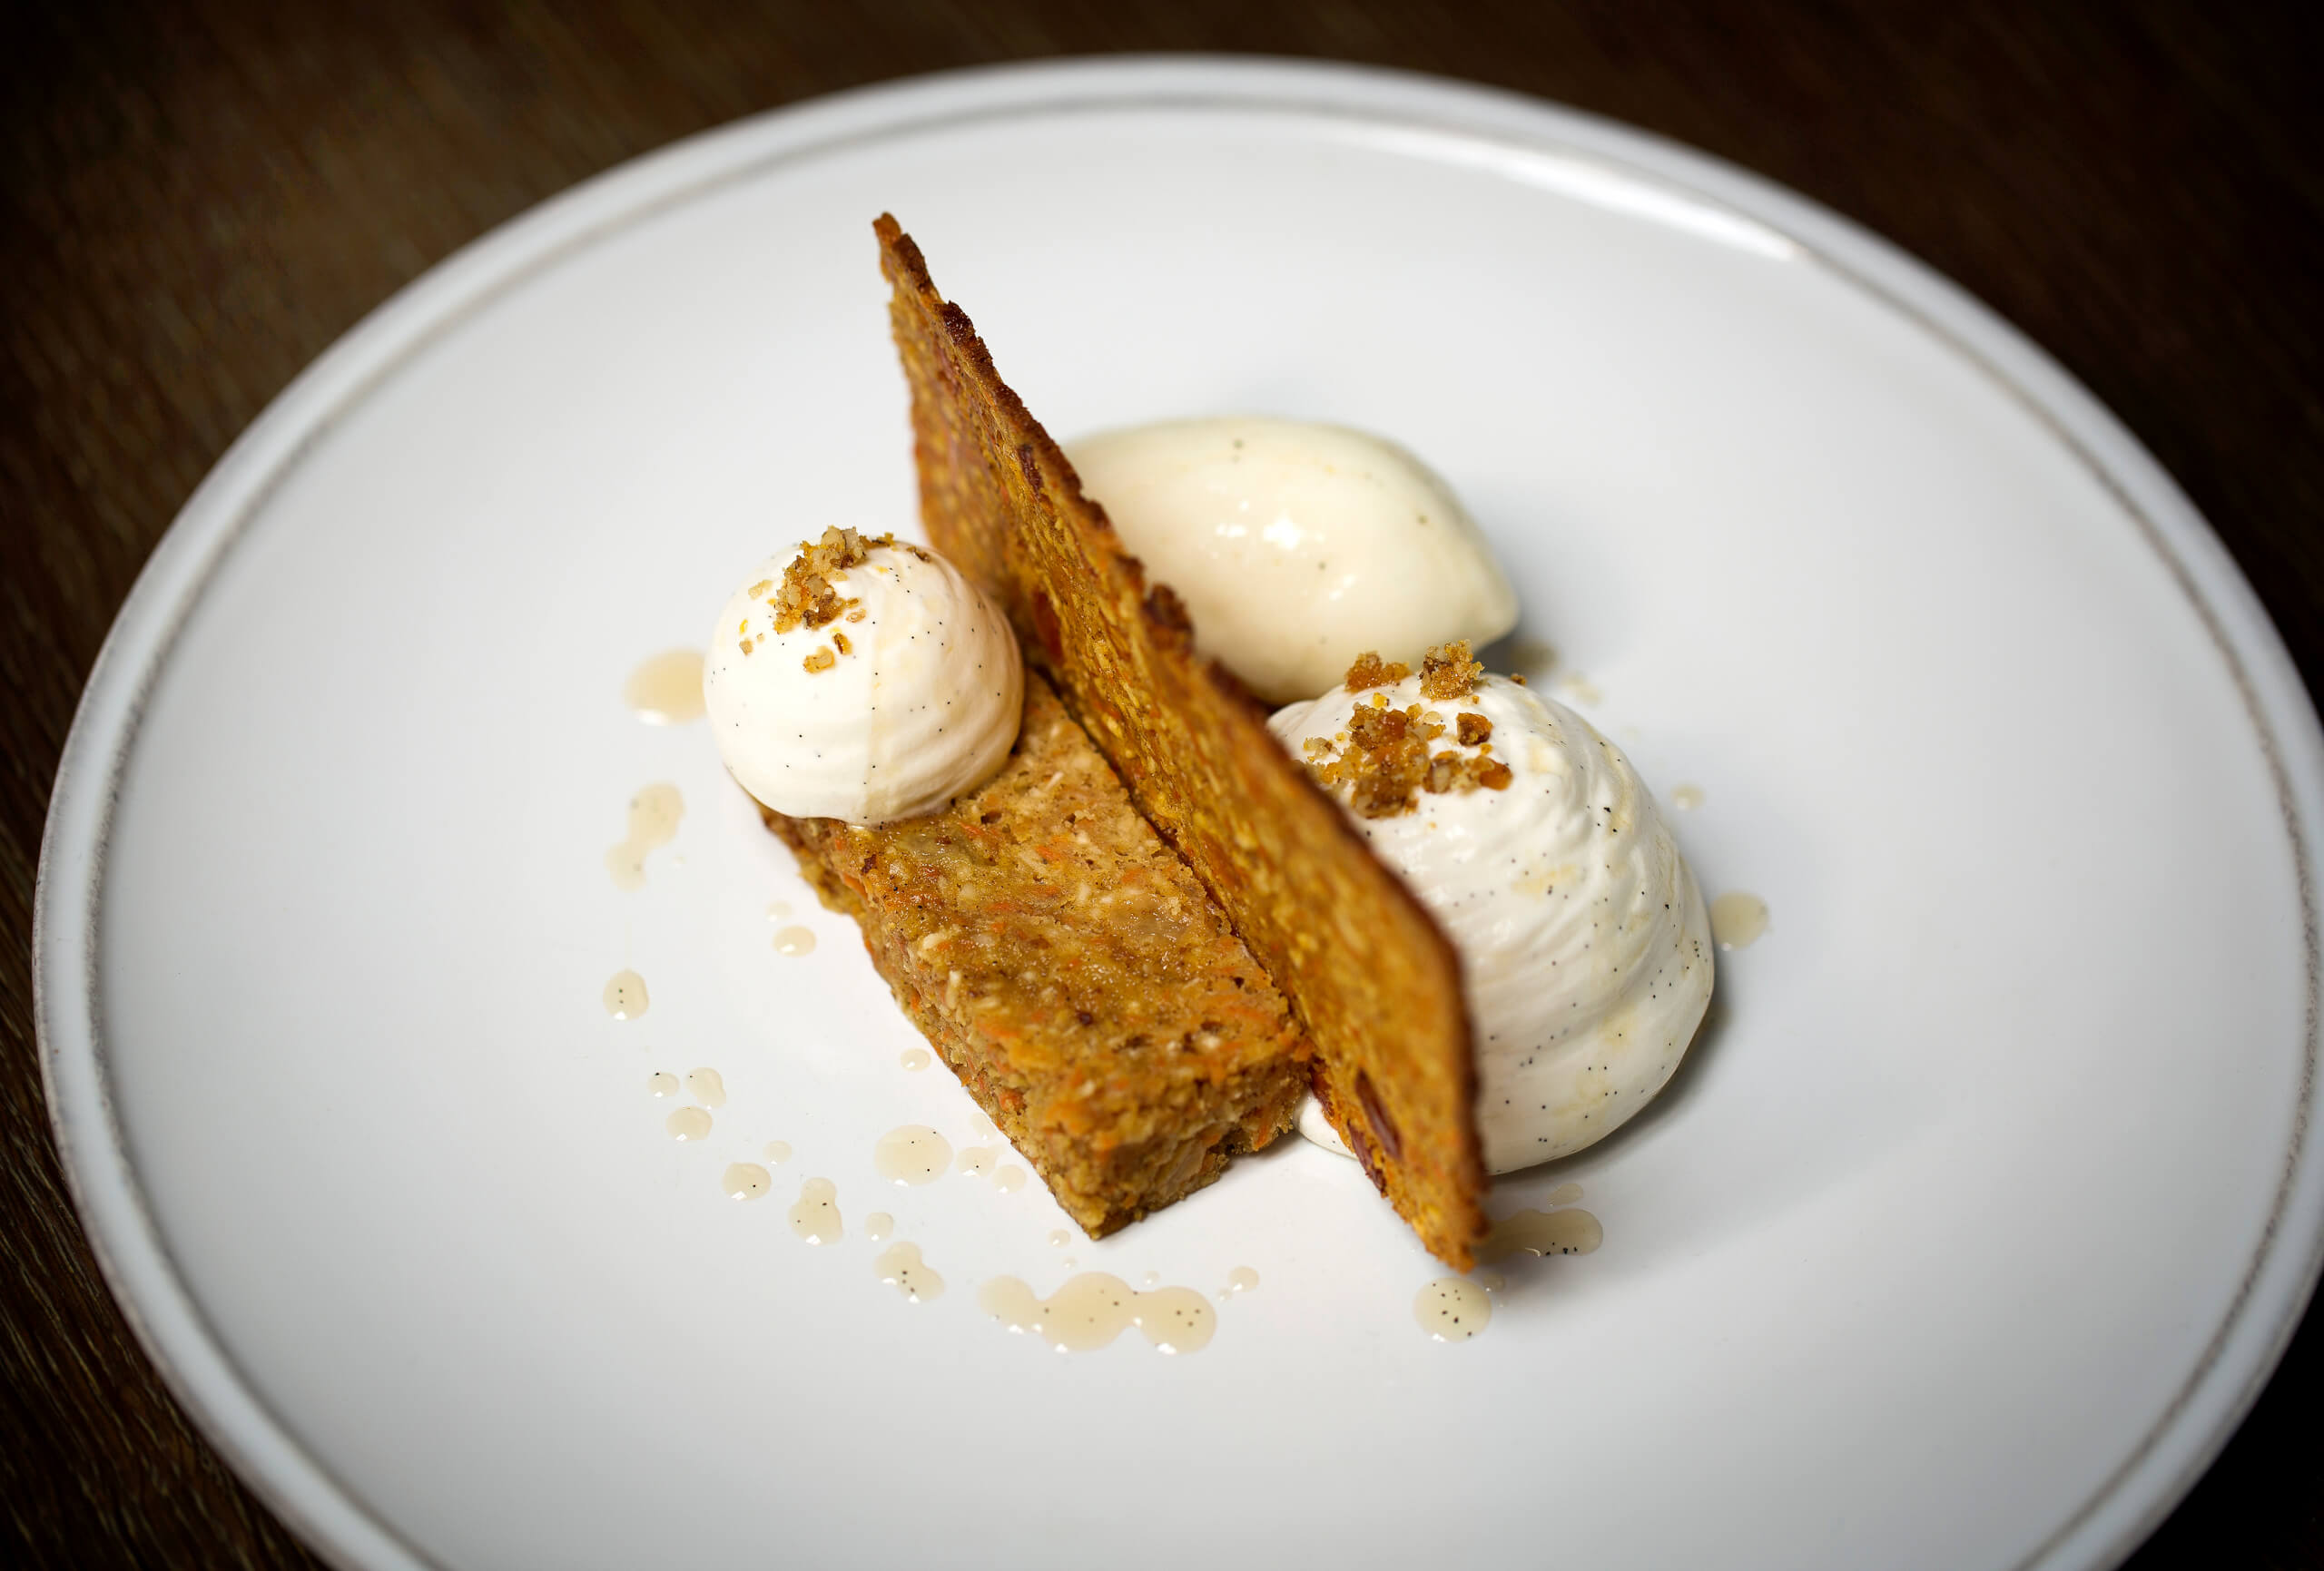 Spiced carrot cake, cream cheese mousse, ginger ice cream